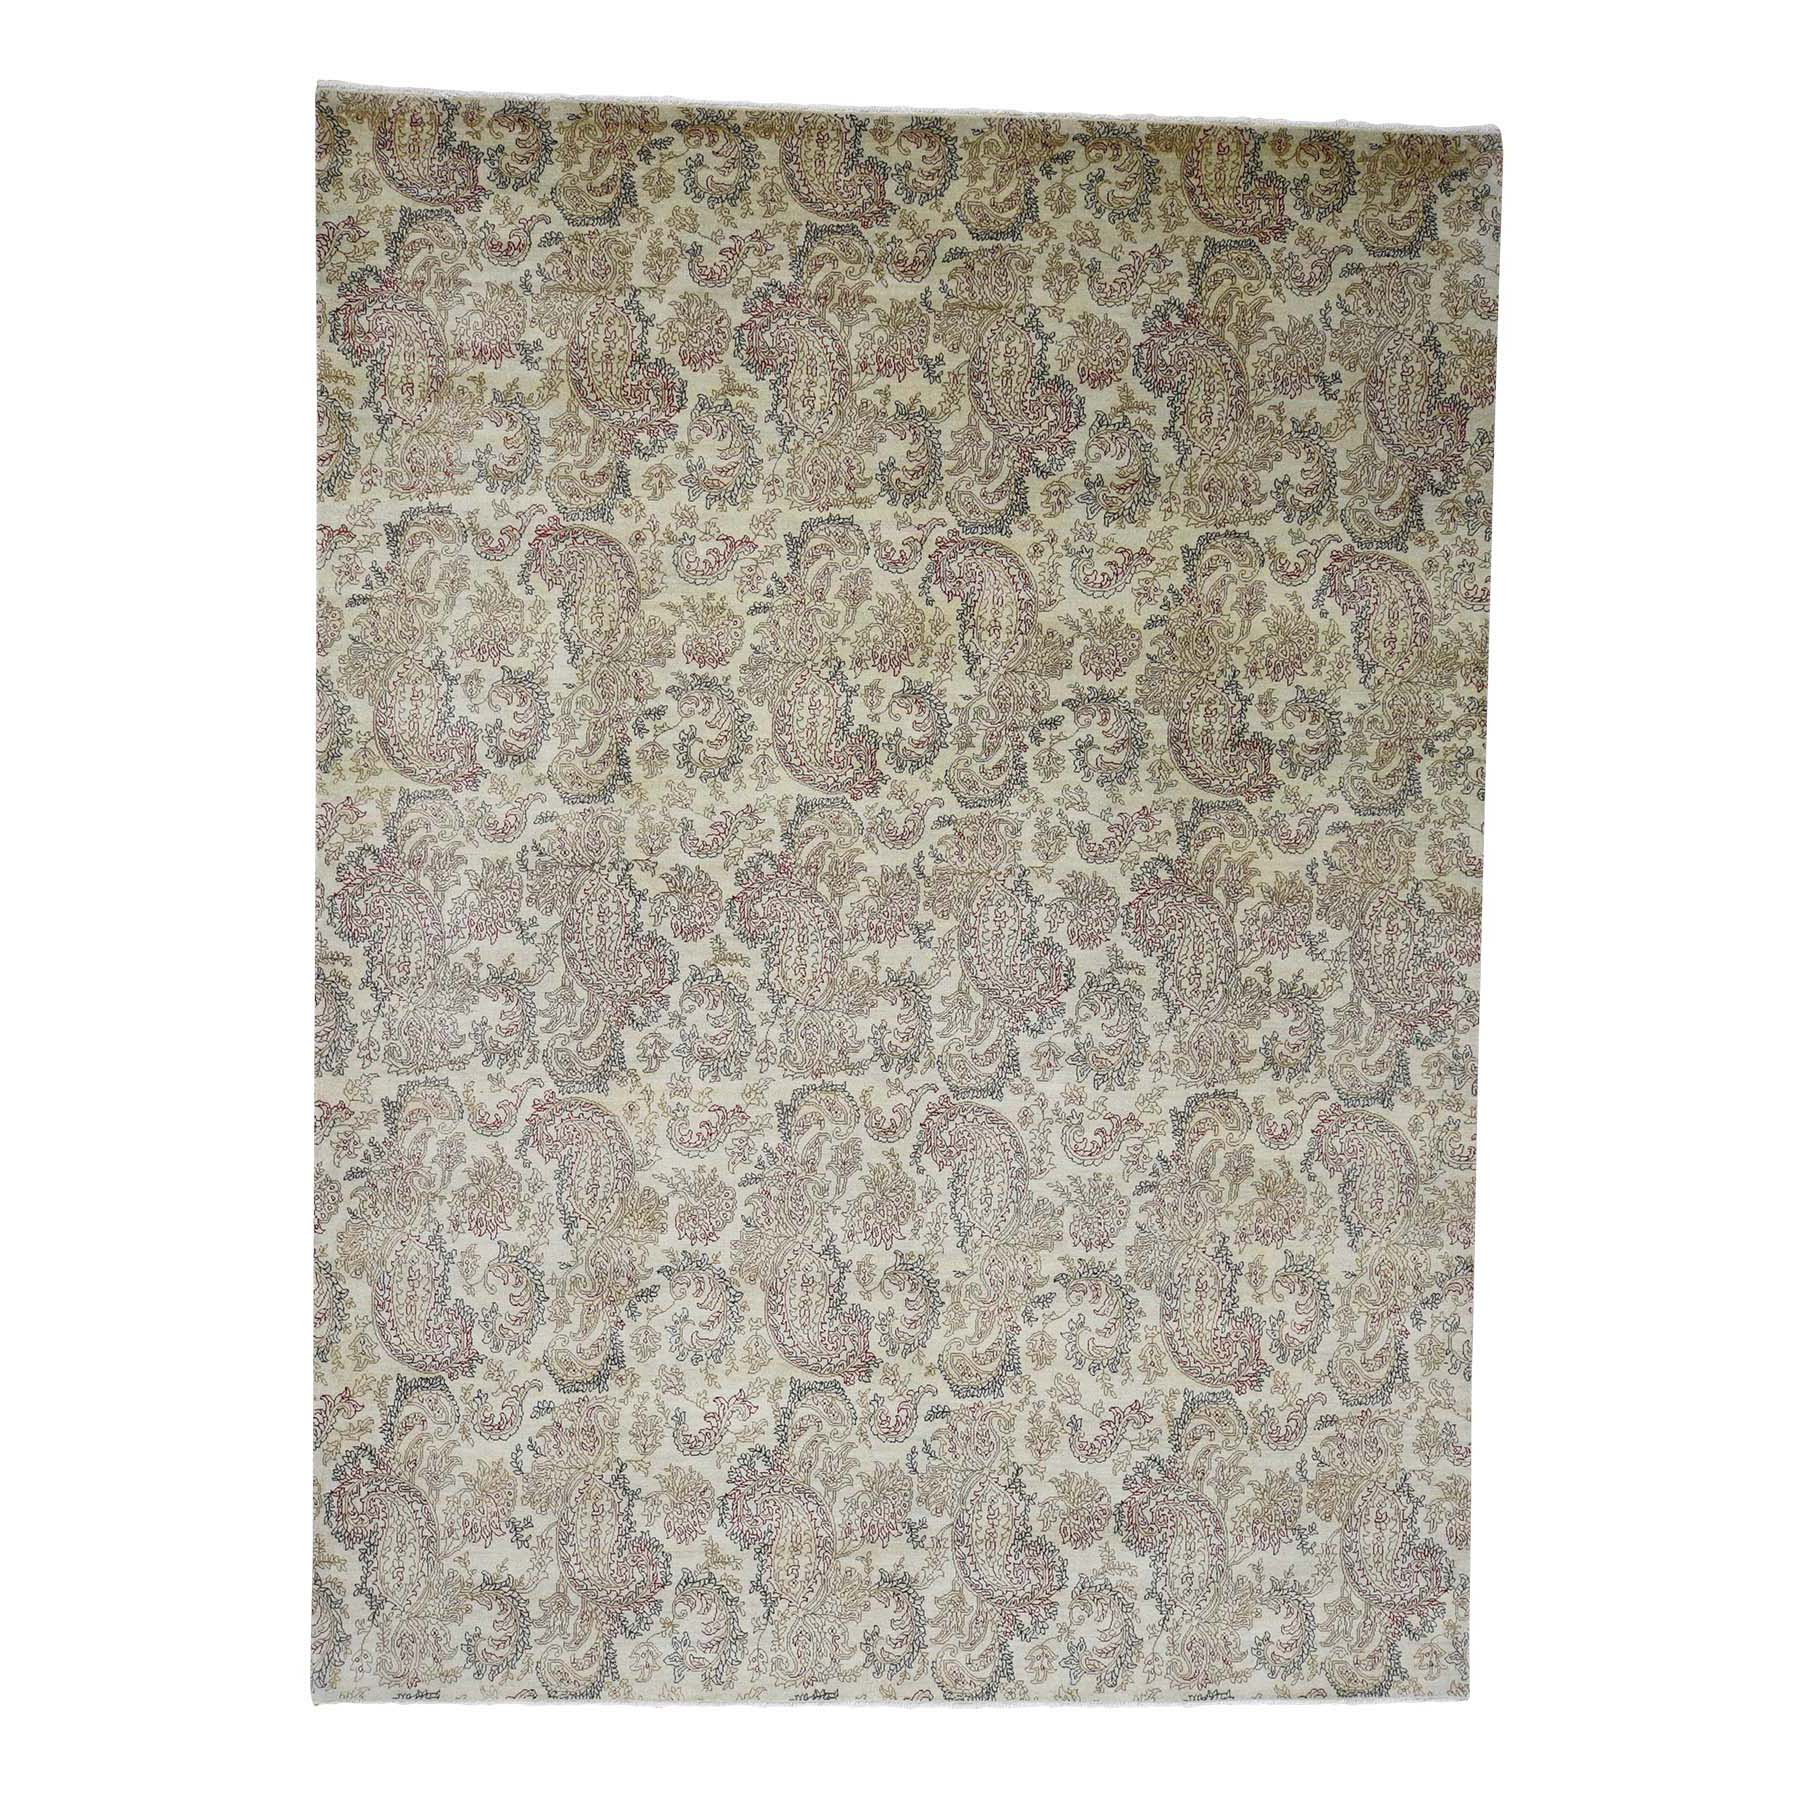 9'1"x12'3" Agra with Paisley Design 100 Percent Wool Hand Woven Oriental Rug 